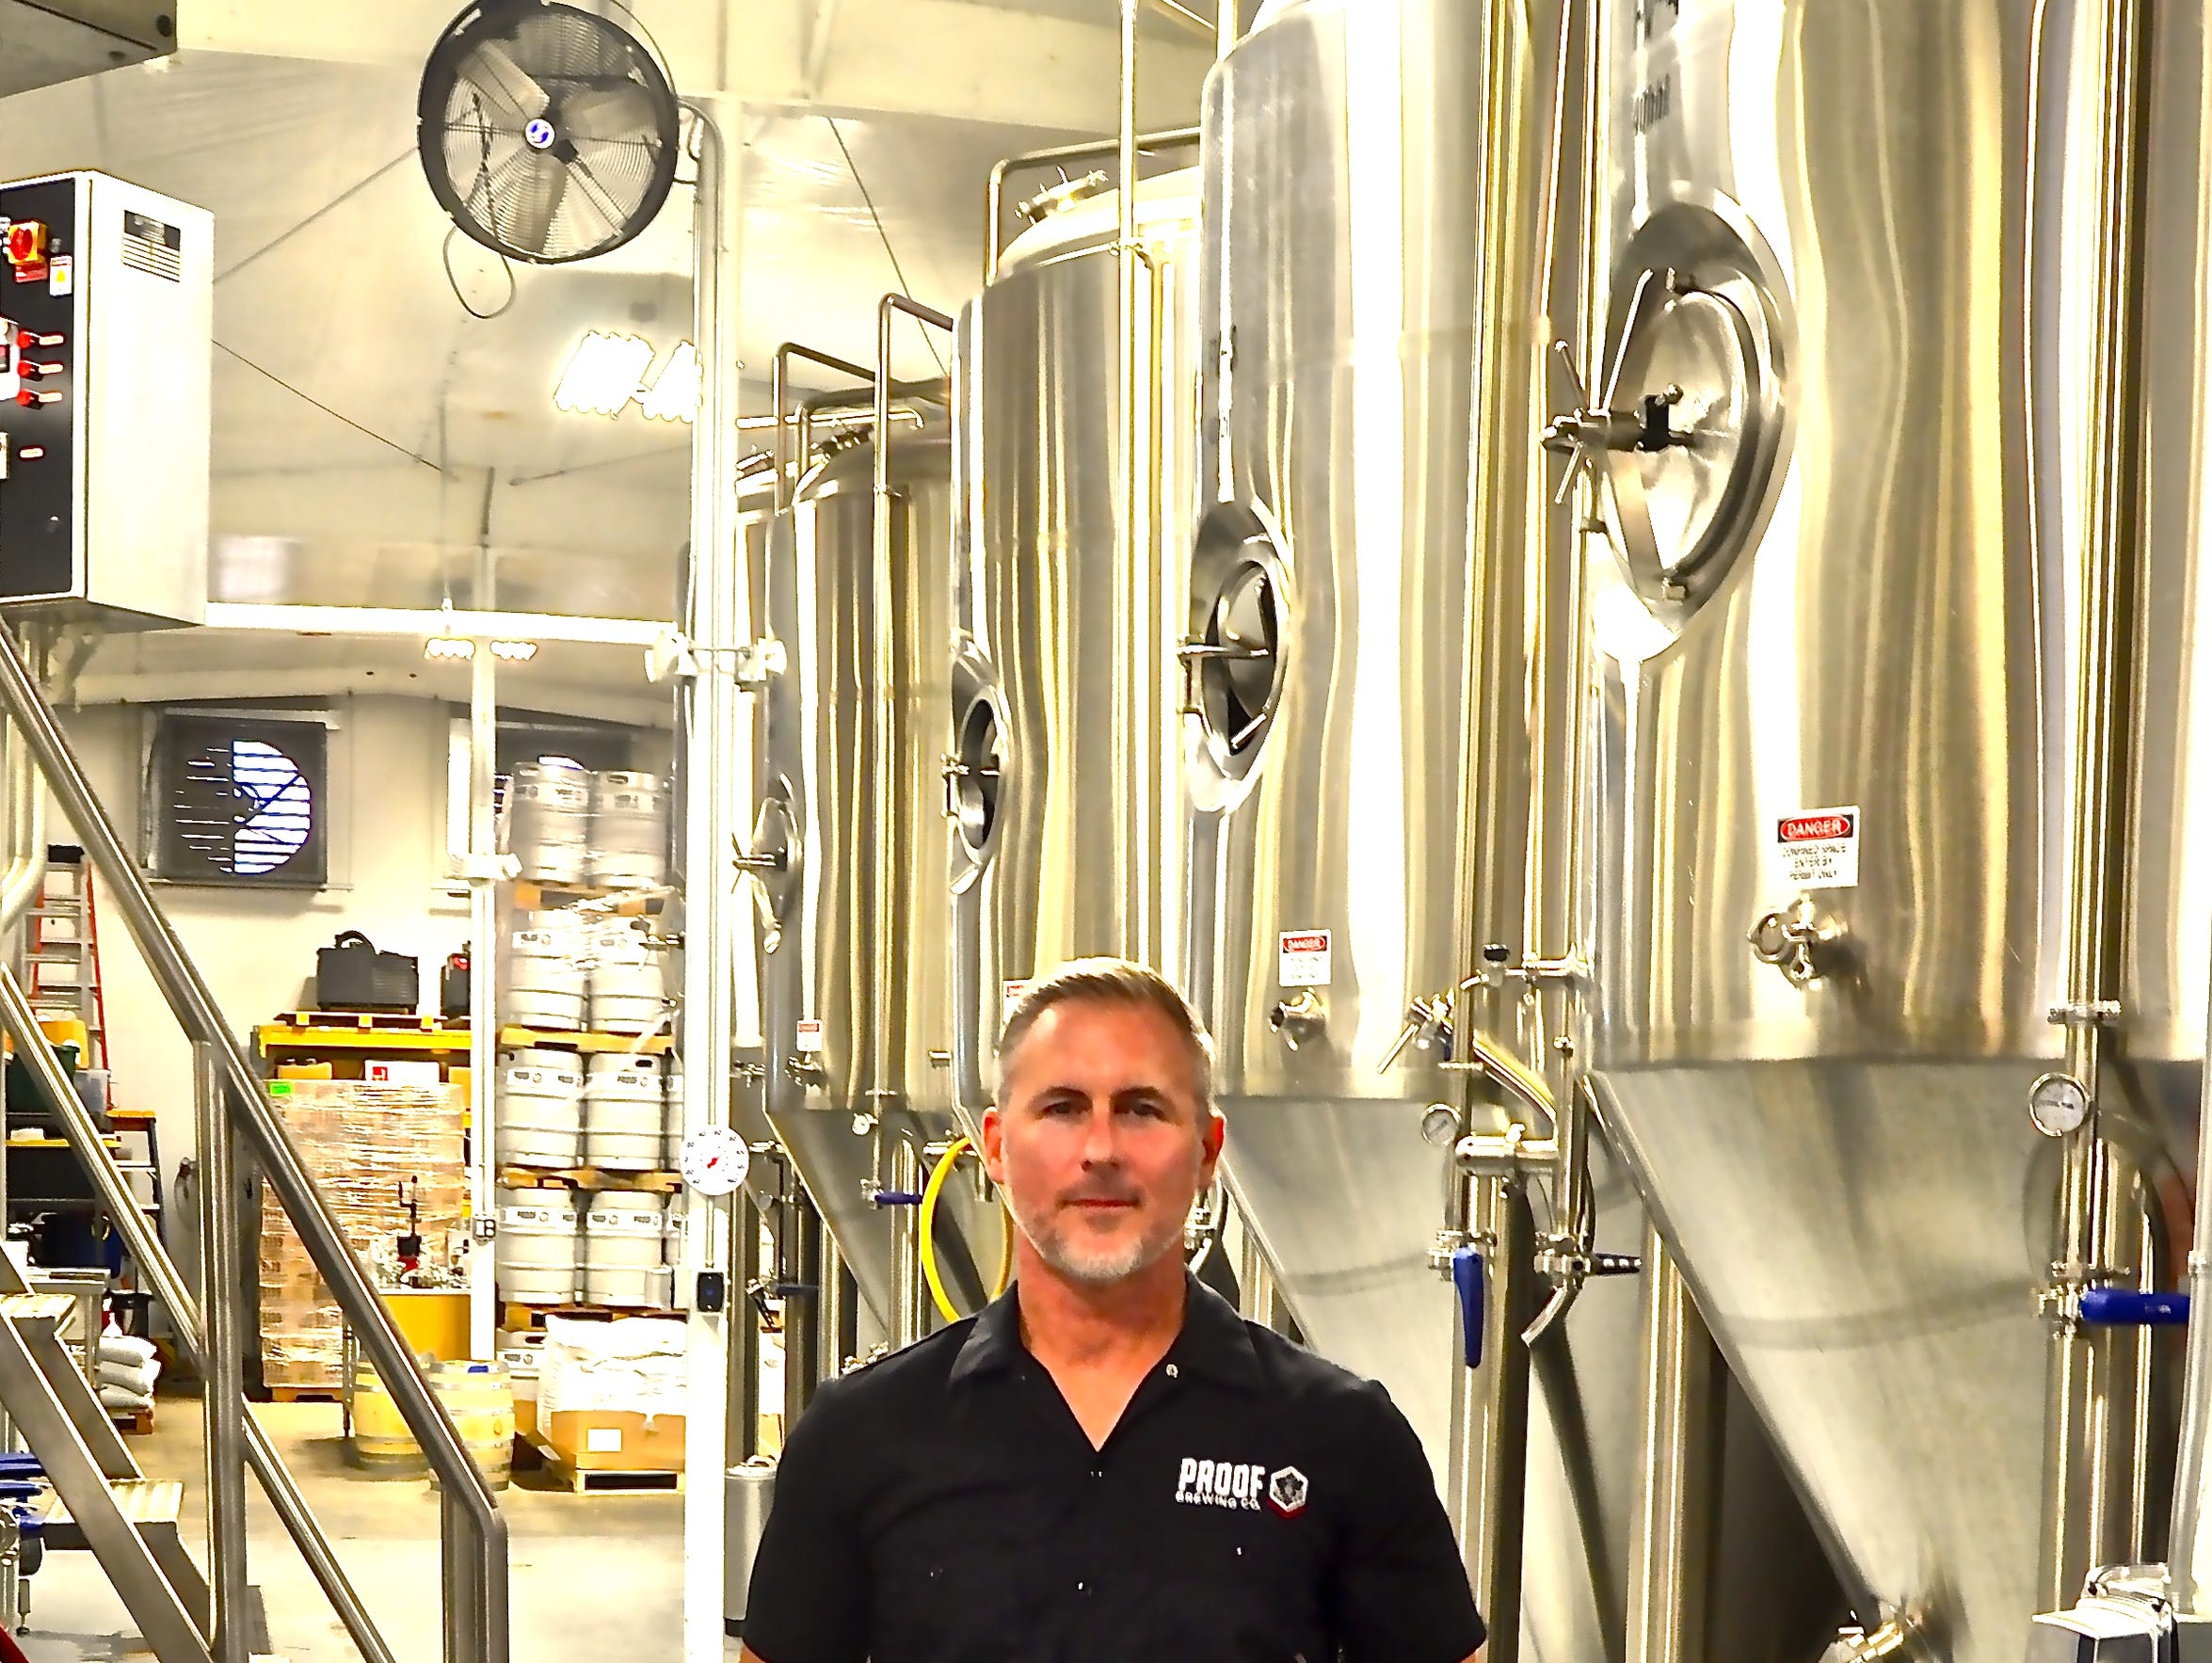 Bryan Burroughs stands amidst the brewing tanks at